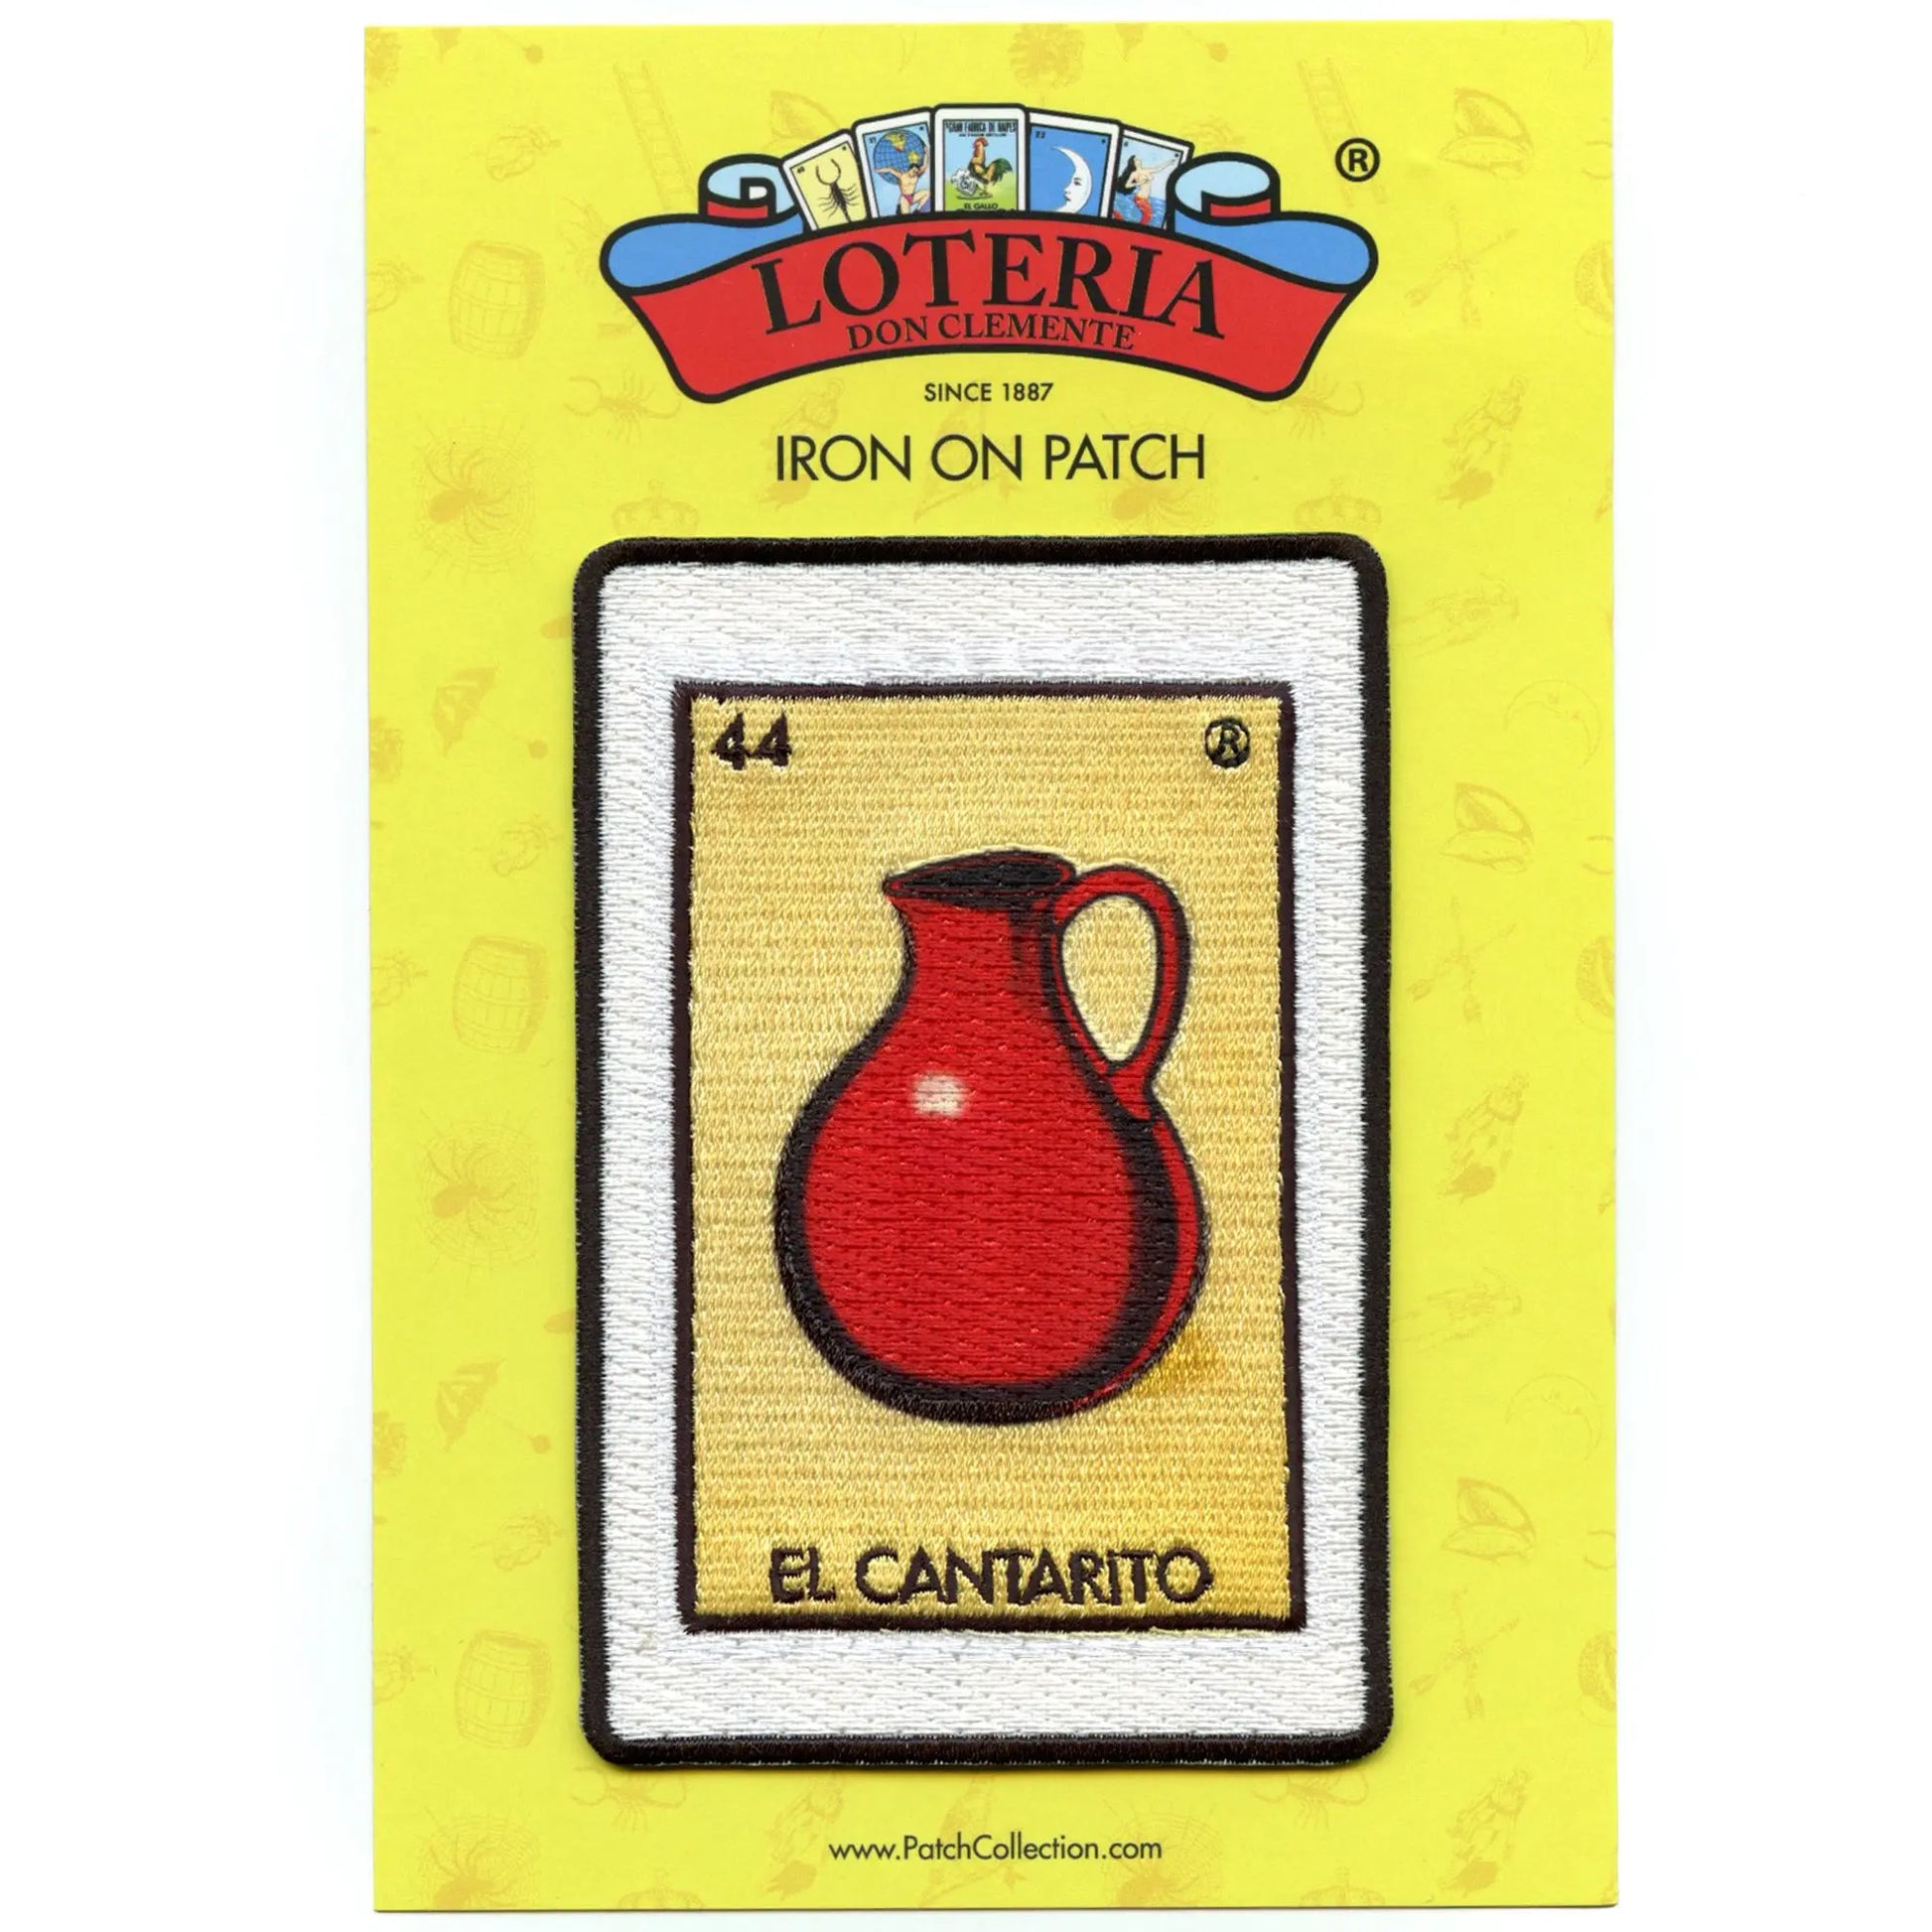 You don't have to live in San Antonio to get your own Loteria